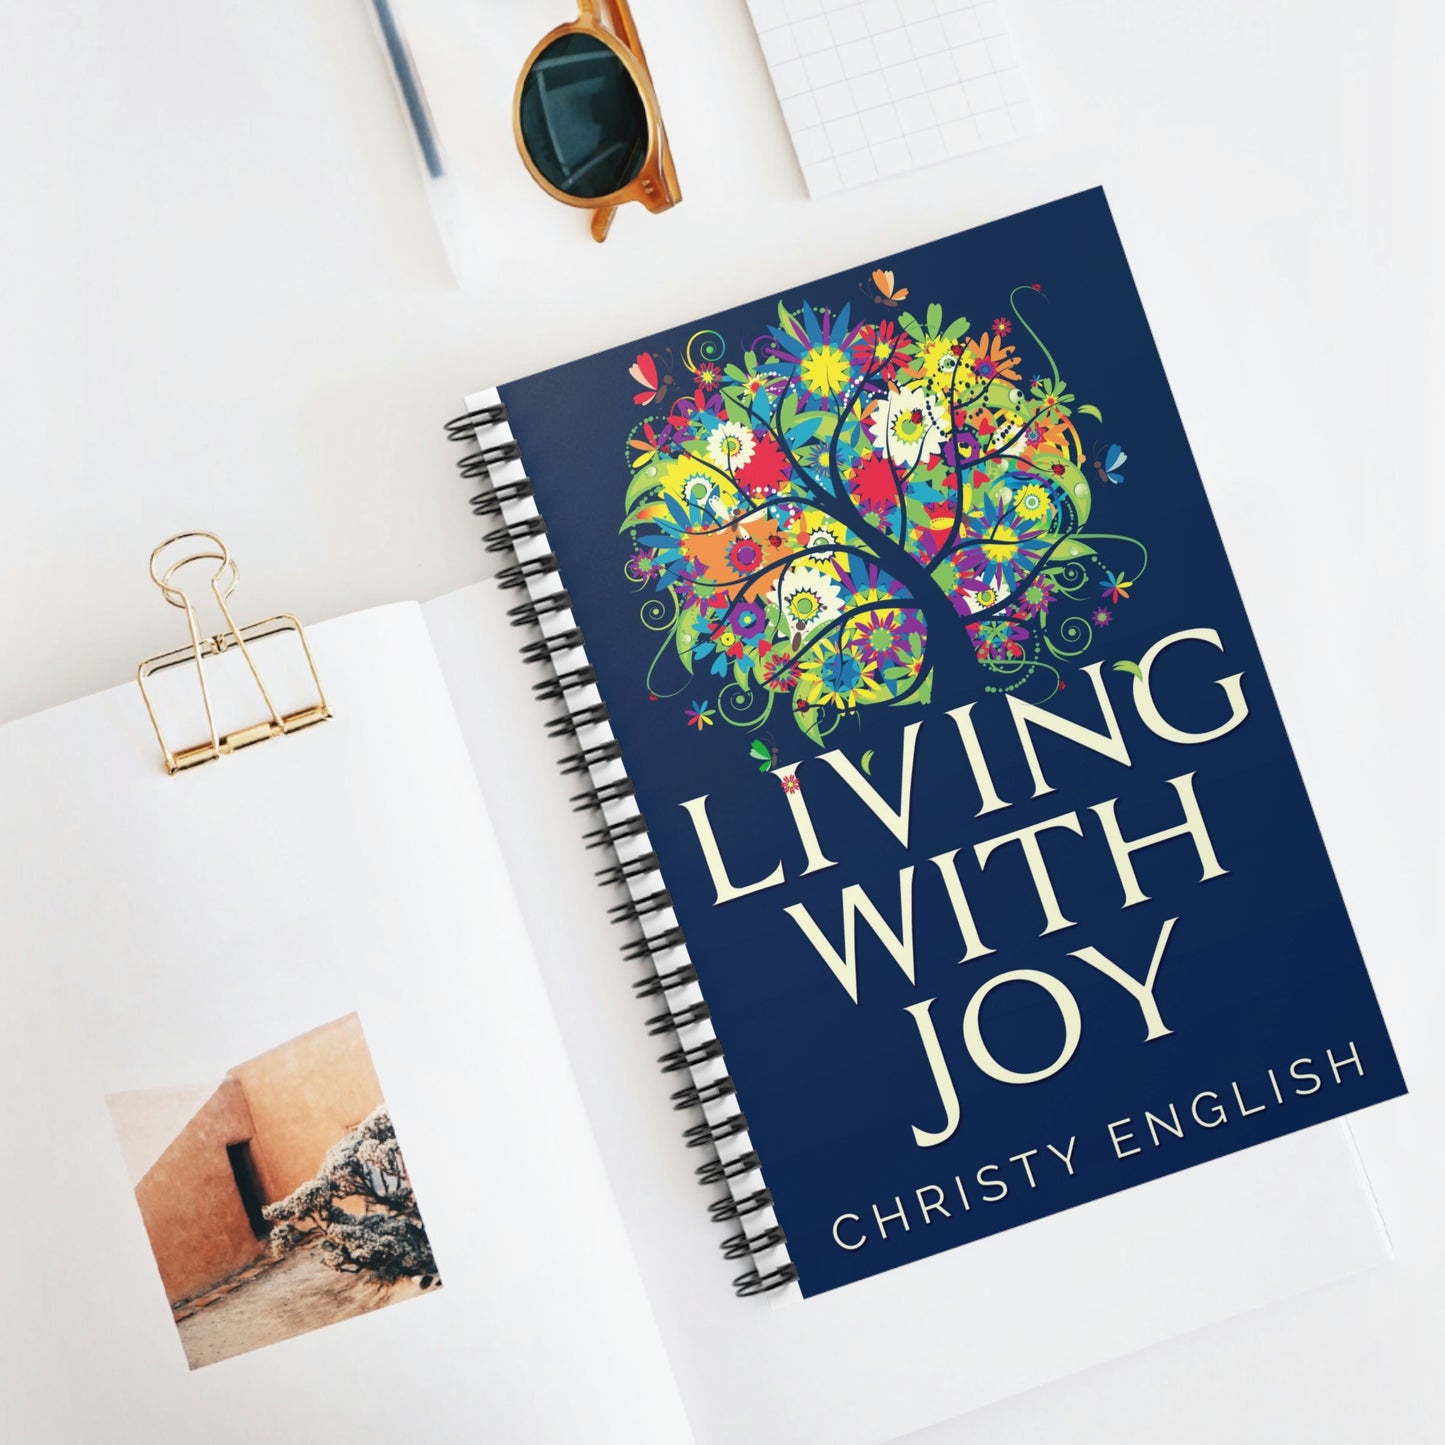 Living With Joy - Spiral Notebook